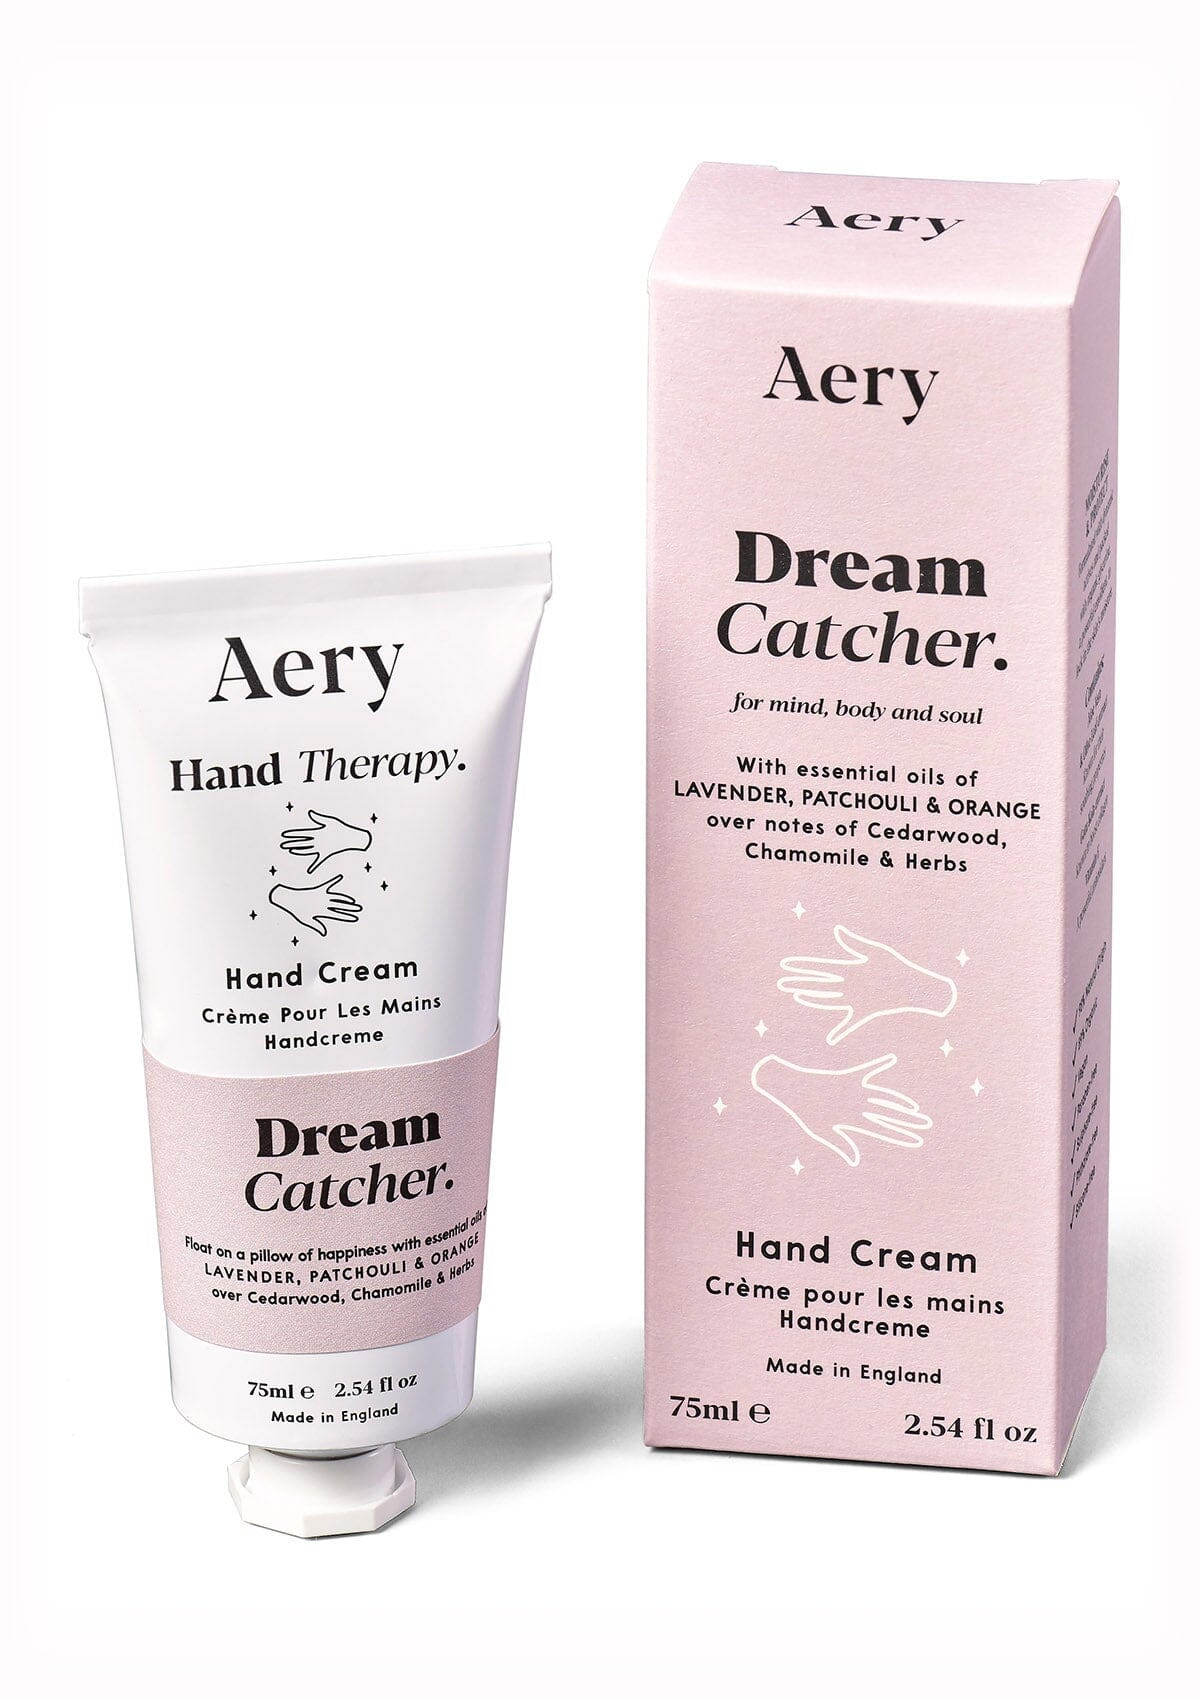 Lilac Dream Catcher hand cream displayed next to product packaging on white background 